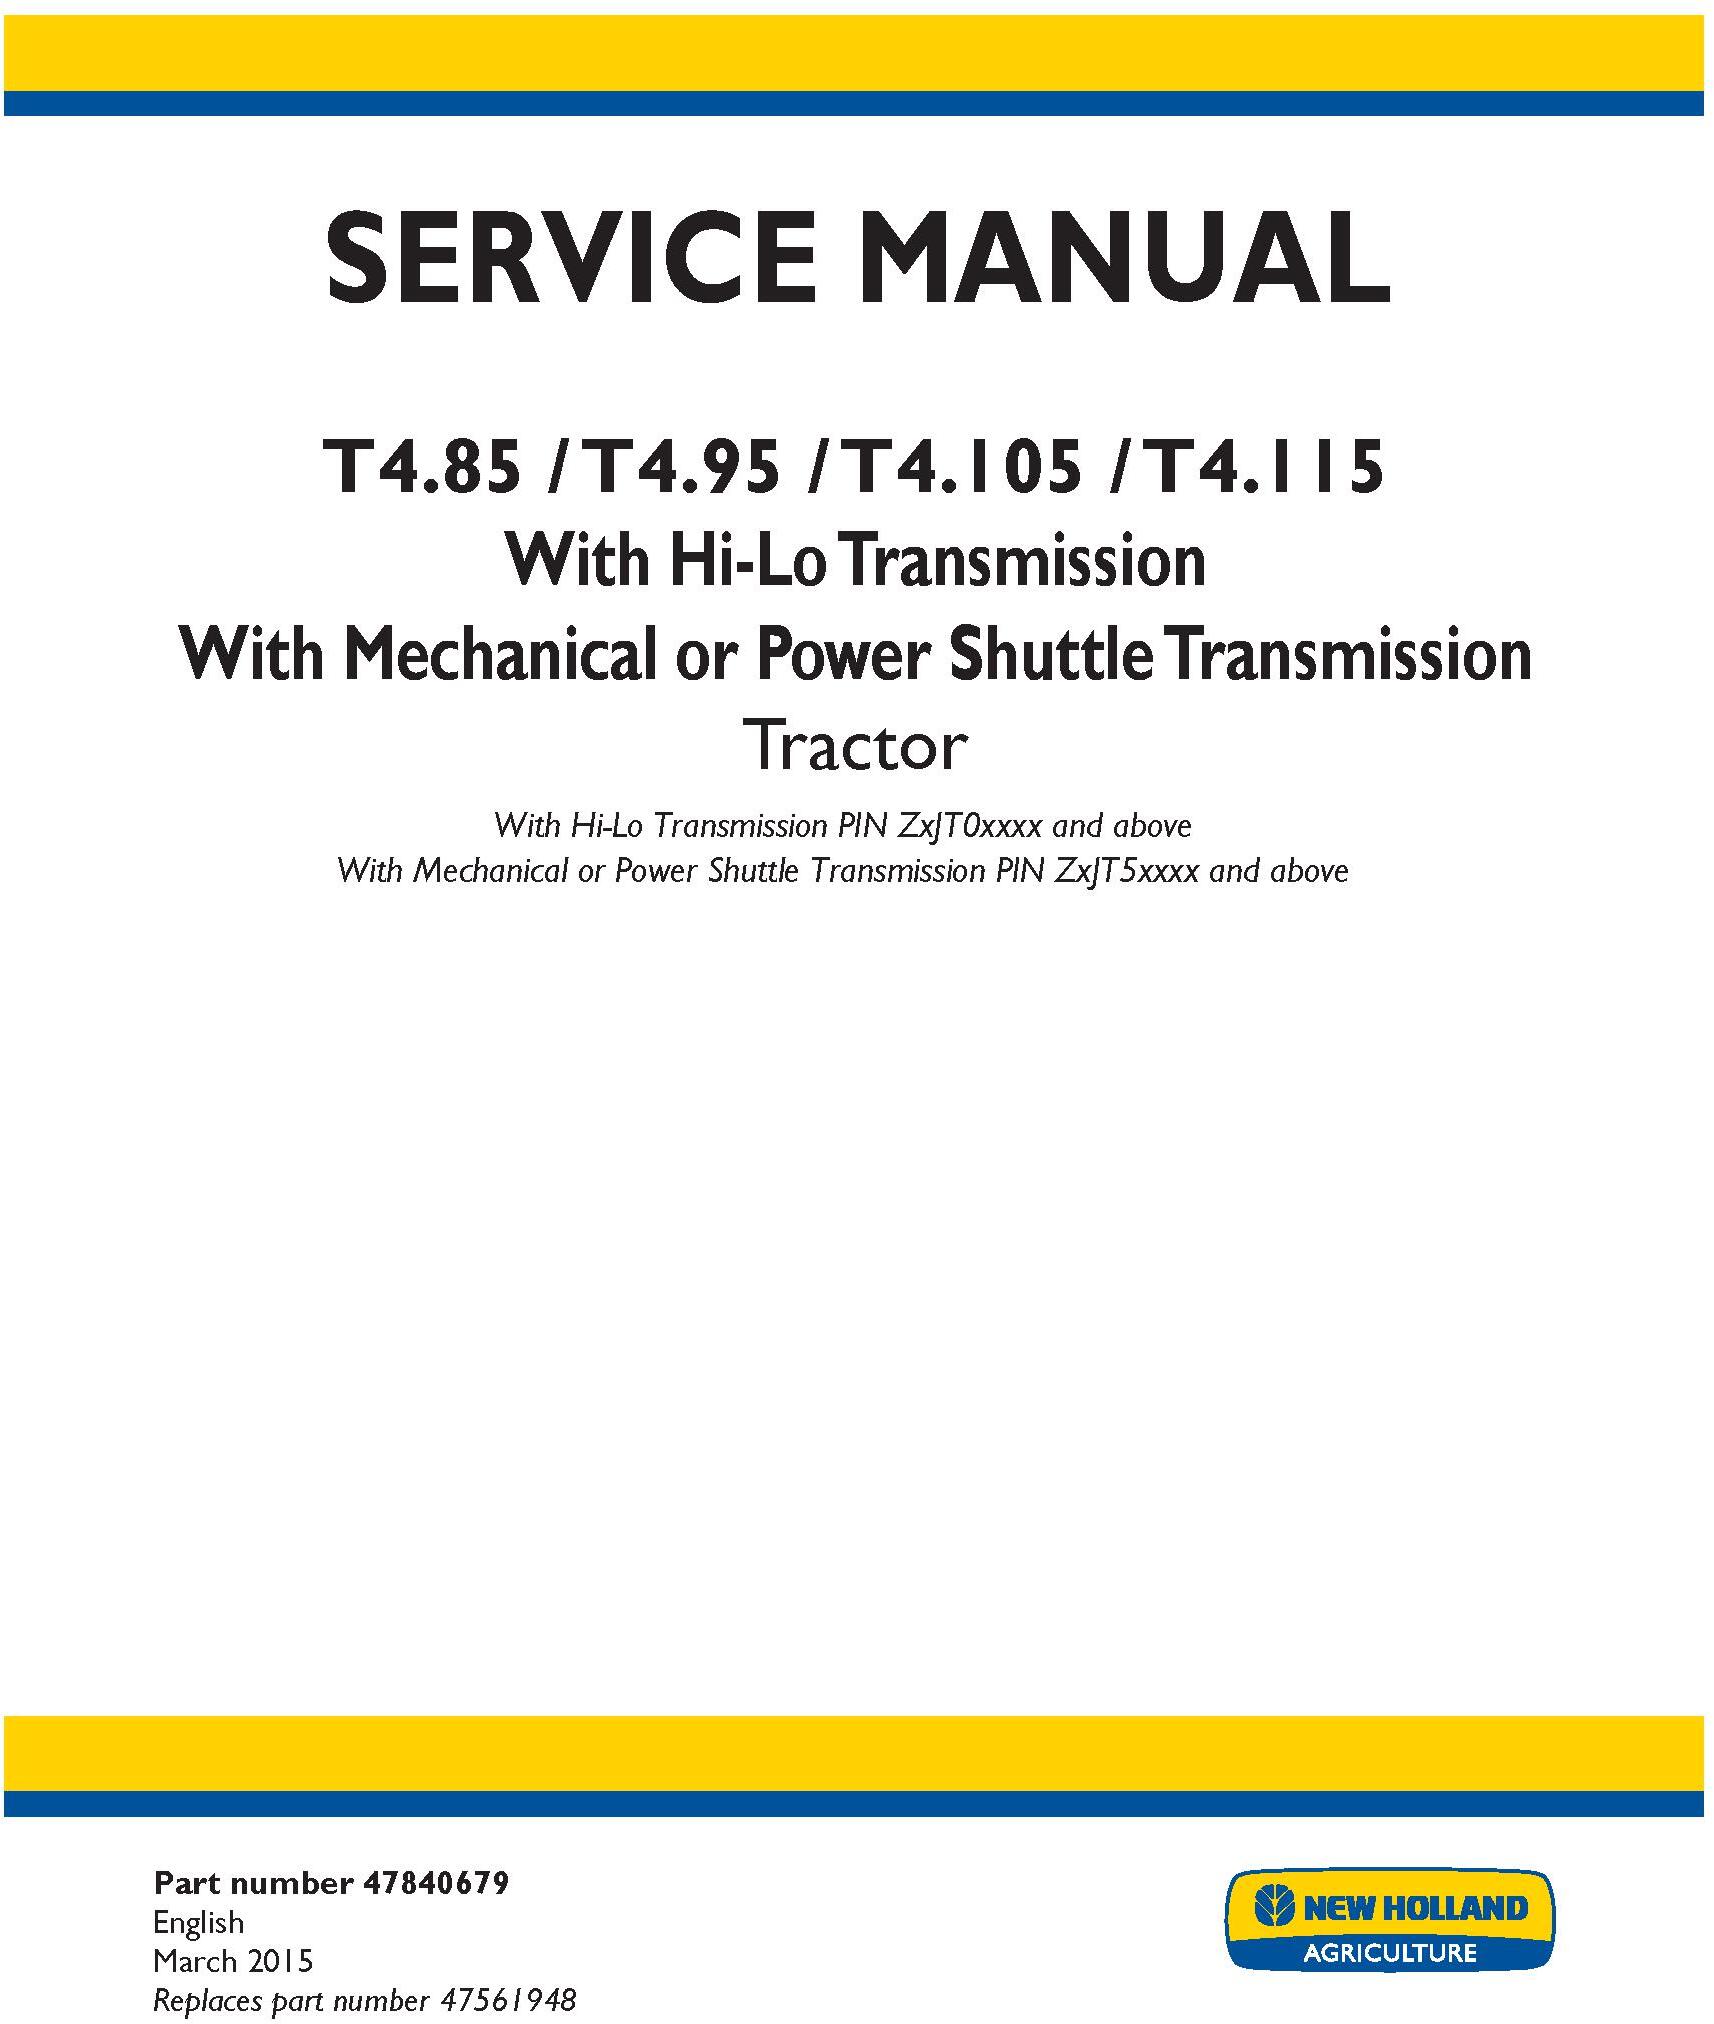 New Holland T4.85, T4.95, T4.105, T4.115 Tractor Complete Service Manual (North America) - 19424